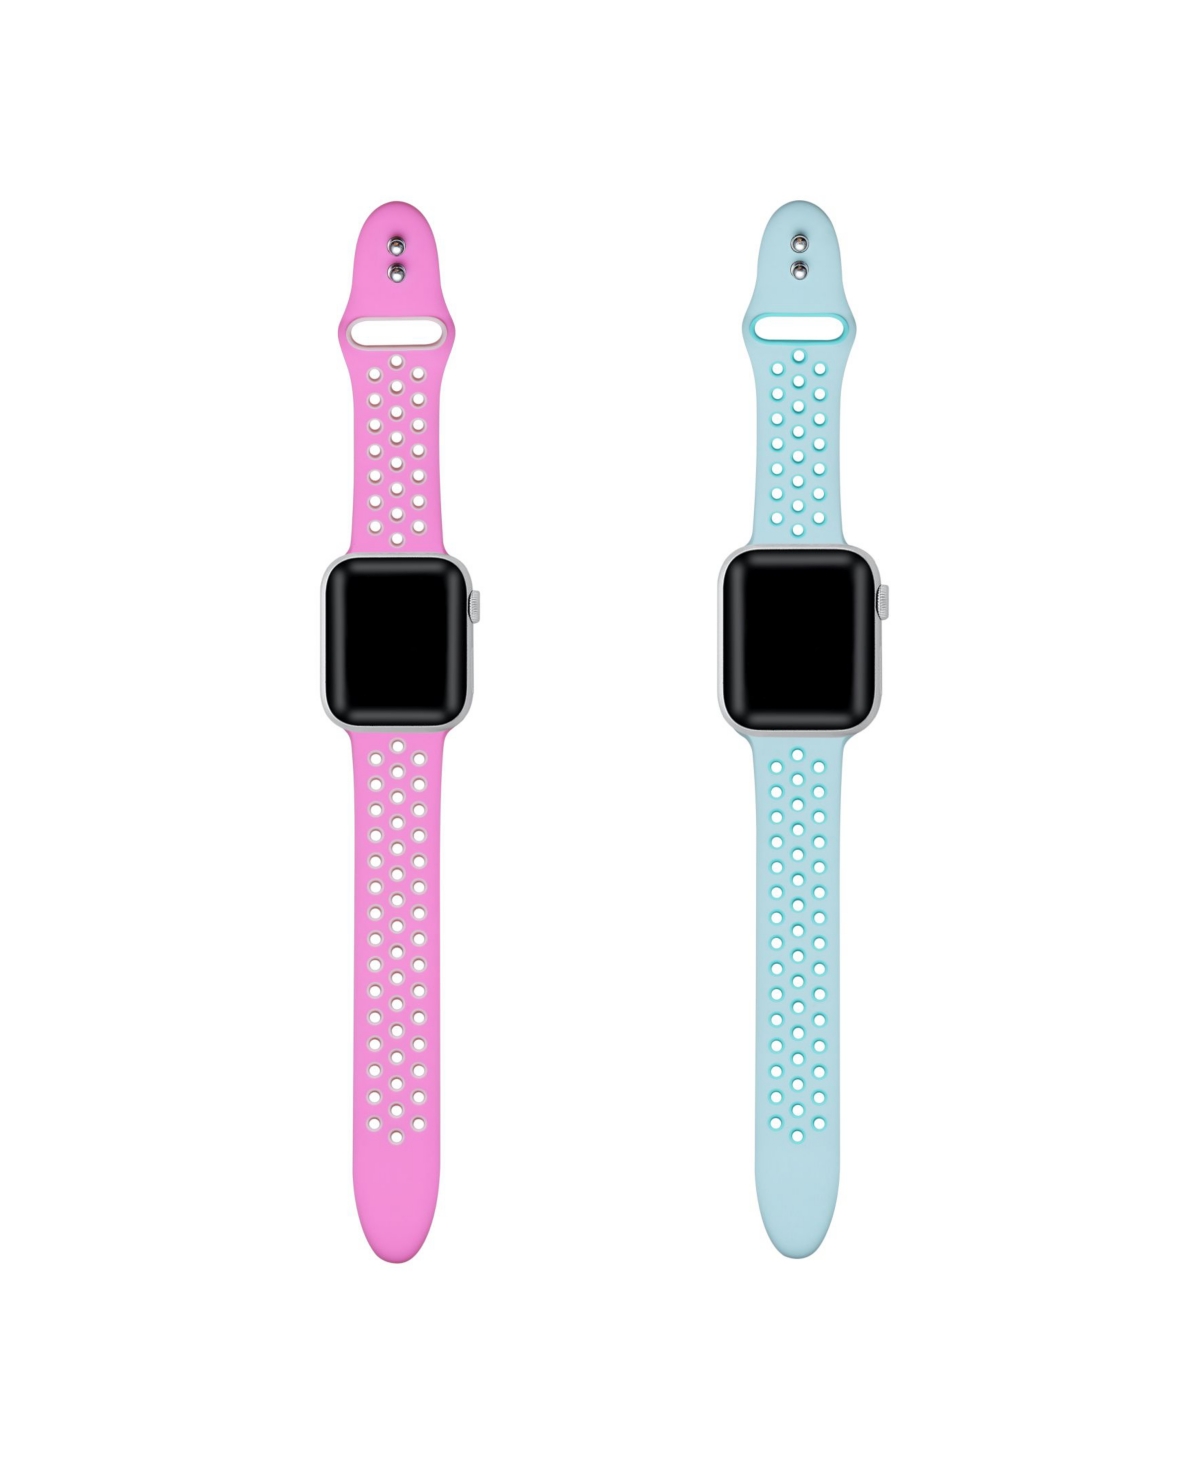 Breathable Sport 2-Pack Mint and Pink Silicone Bands for Apple Watch, 38mm-40mm - Mint, Pink